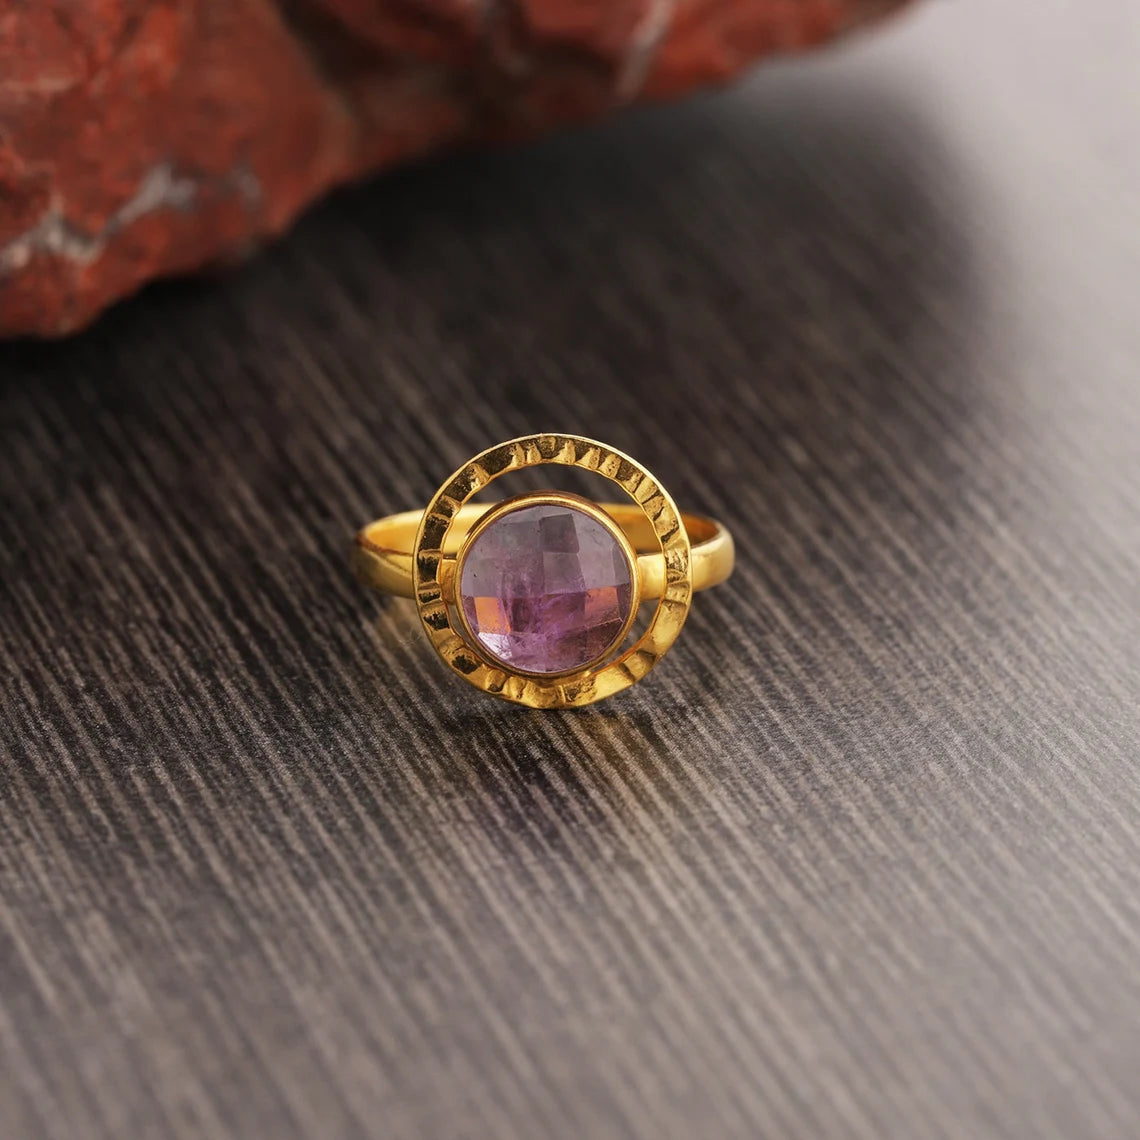 Natural Purple Amethyst Ring - Amethyst Gold Ring - 925 Sterling Silver Amethyst Ring, Ring for Women, Stacking Ring, Minimalist Ring